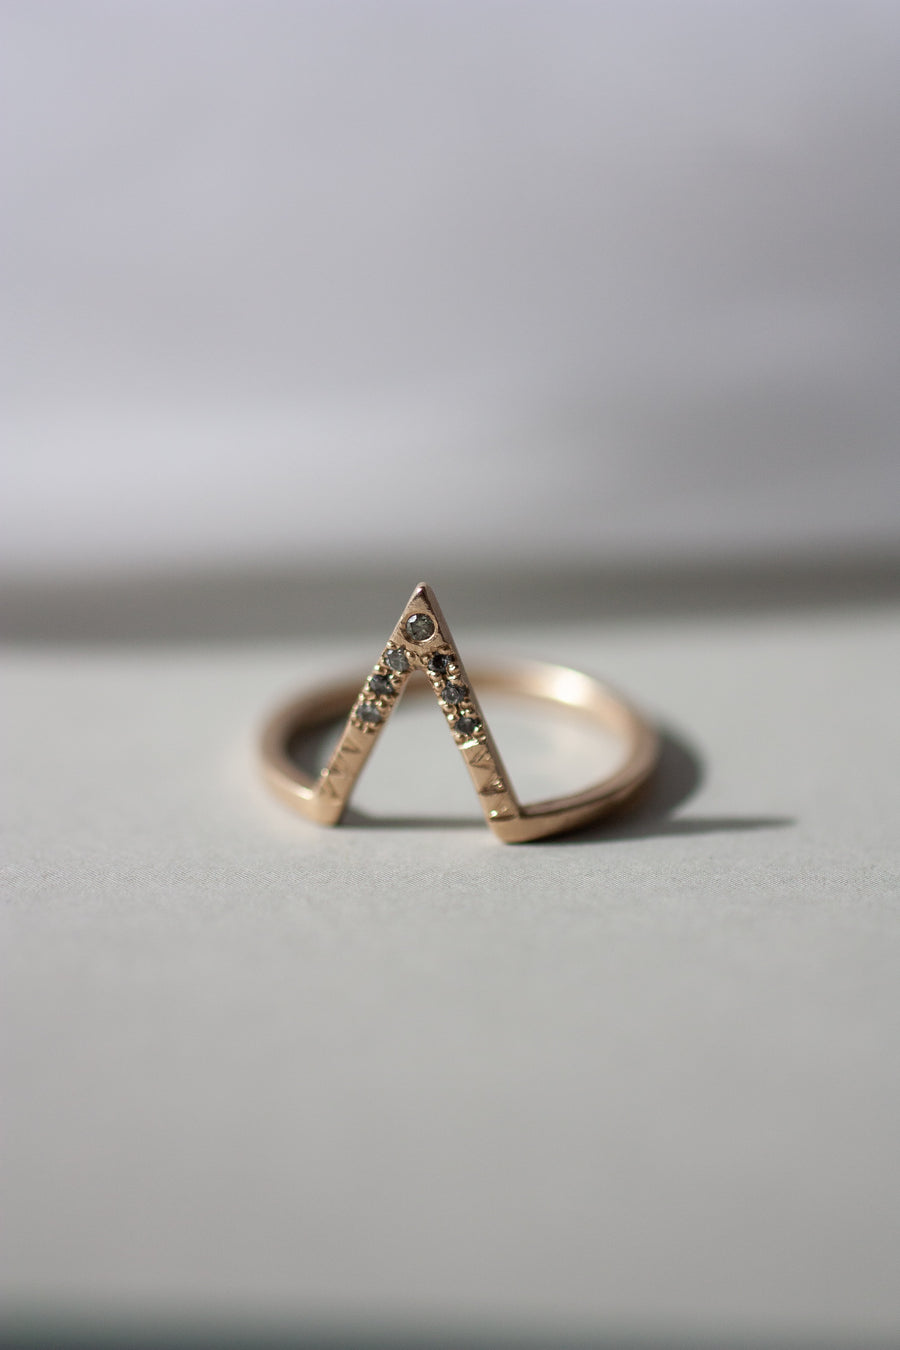 Fine alternative jewelry in East Kootenays: Acre wedding band with kite shape diamonds and hand engraved triangle details